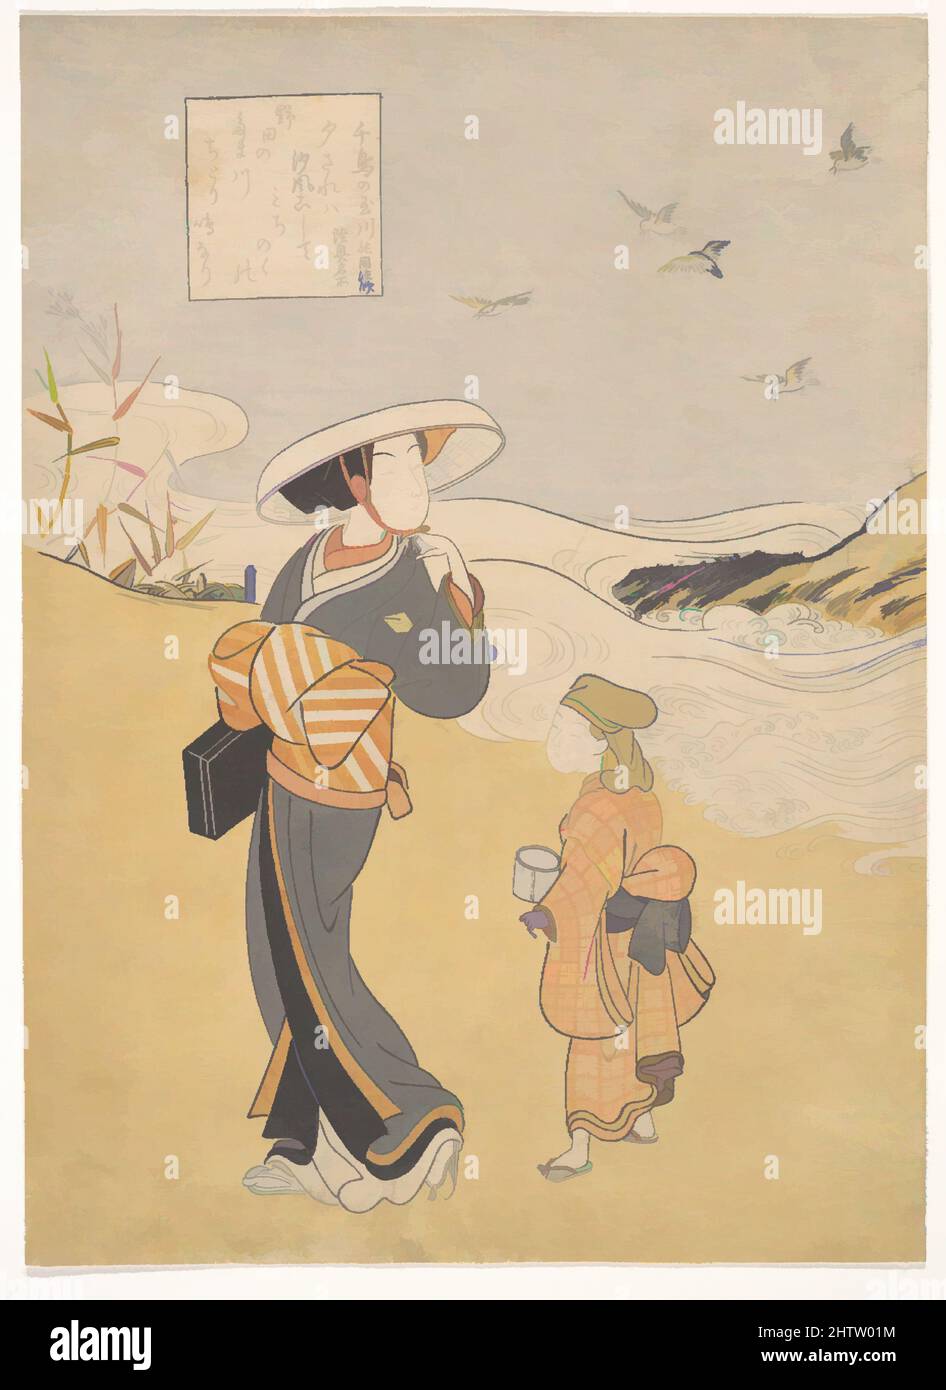 Art inspired by The Jewel River of Plovers, a Famous Place in Mutsu Province, from the series Six Jewel Rivers (Mu Tamagawa: Chidori no Tamagawa, Mutsu meisho), 六玉川　「千鳥の玉川　陸奥名所」, Edo period (1615–1868), Japan, Polychrome woodblock print; ink and color on paper, 10 13/16 x 7 13/16 in. (, Classic works modernized by Artotop with a splash of modernity. Shapes, color and value, eye-catching visual impact on art. Emotions through freedom of artworks in a contemporary way. A timeless message pursuing a wildly creative new direction. Artists turning to the digital medium and creating the Artotop NFT Stock Photo